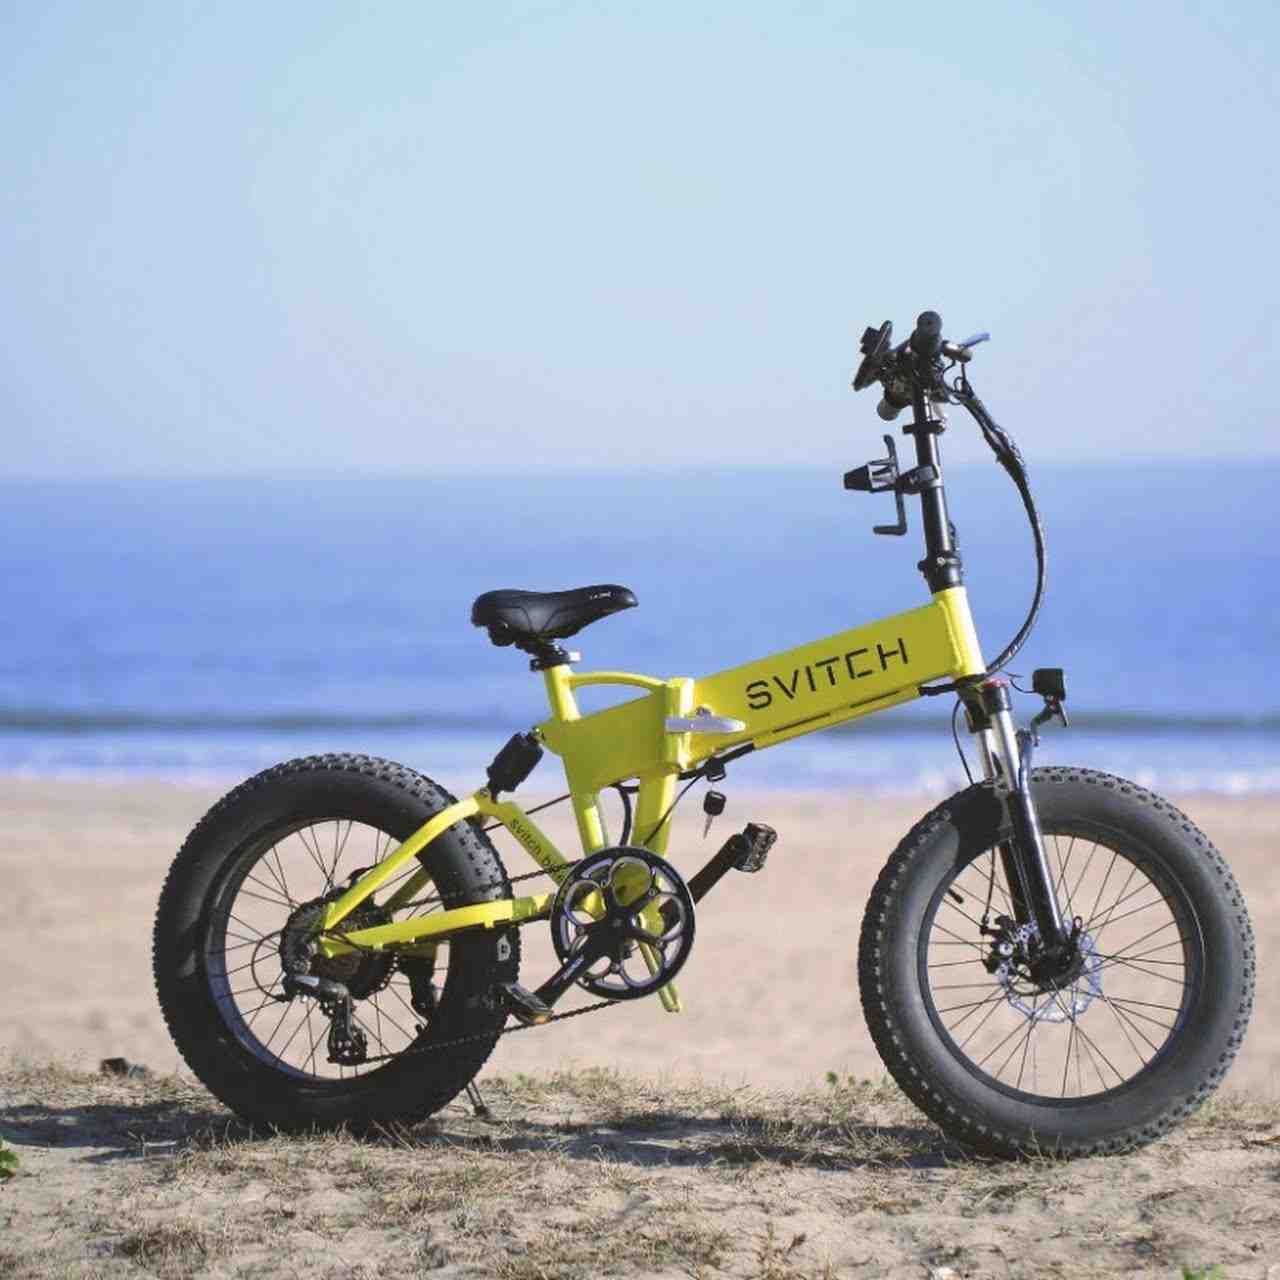 How do I convert my bike to electric cycle?